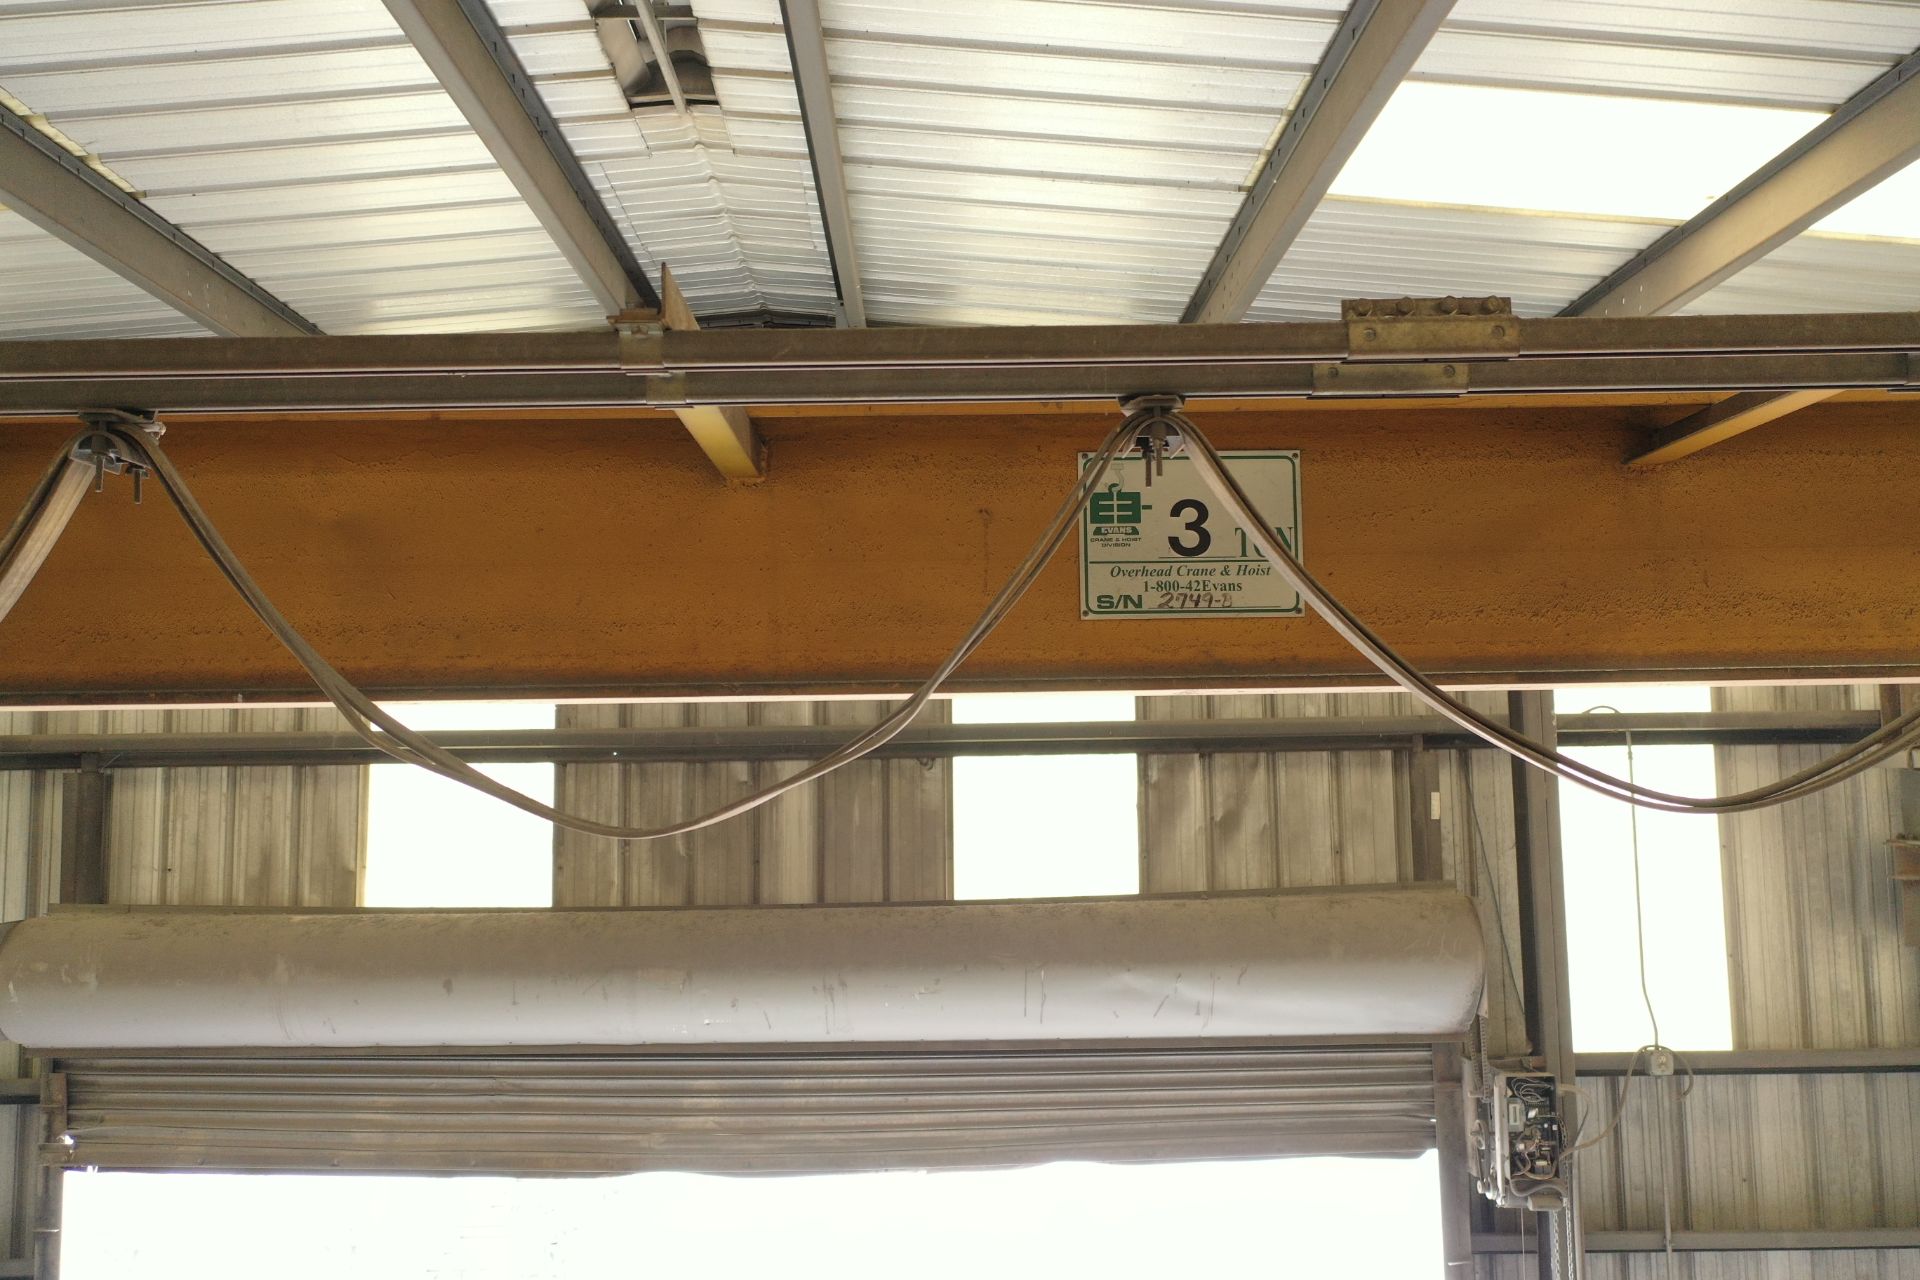 Evans 3 Ton Overhead Crane SN: 2479B with 3 Ton Hoist & Pendant Control, Approx 40 ft Span (LOCATION - Image 2 of 7